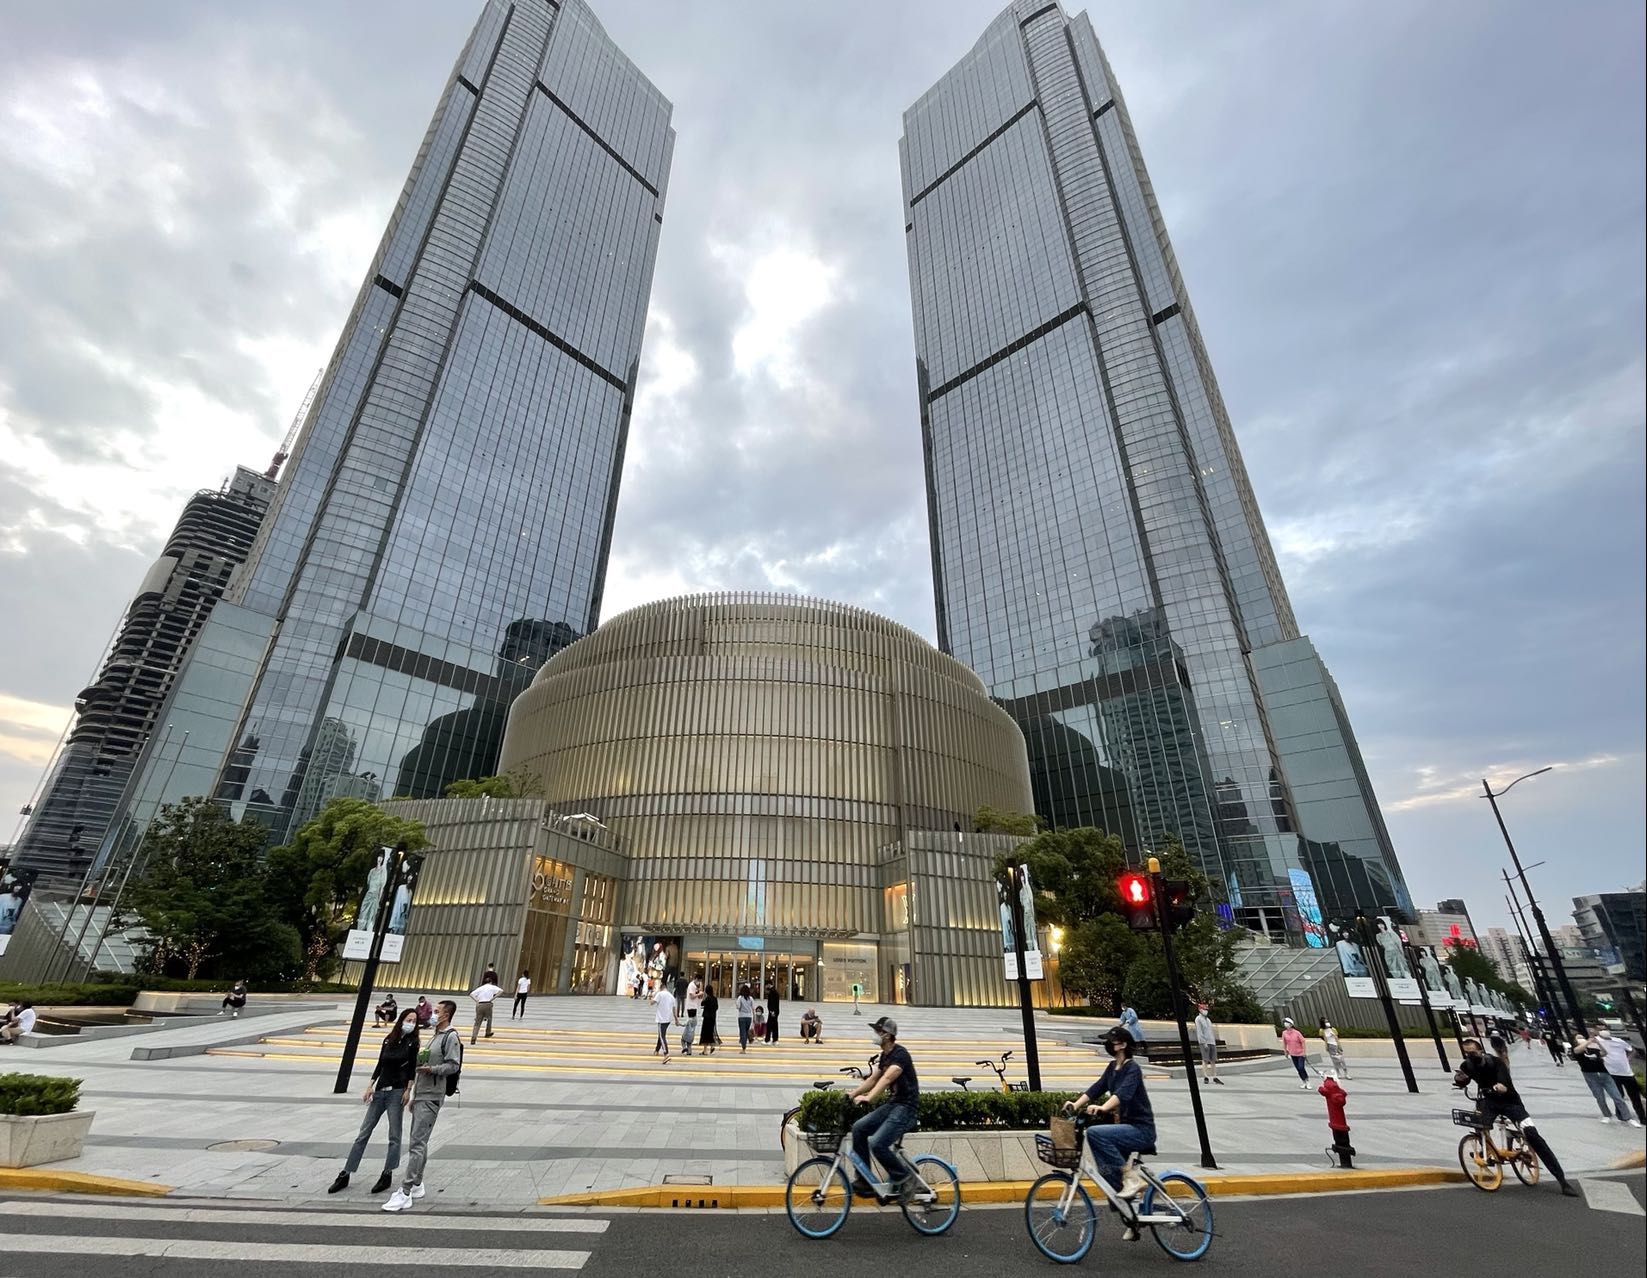  A view of Hang Lung Plaza in Shanghai on May 30. Photo: Feng Yu/GT